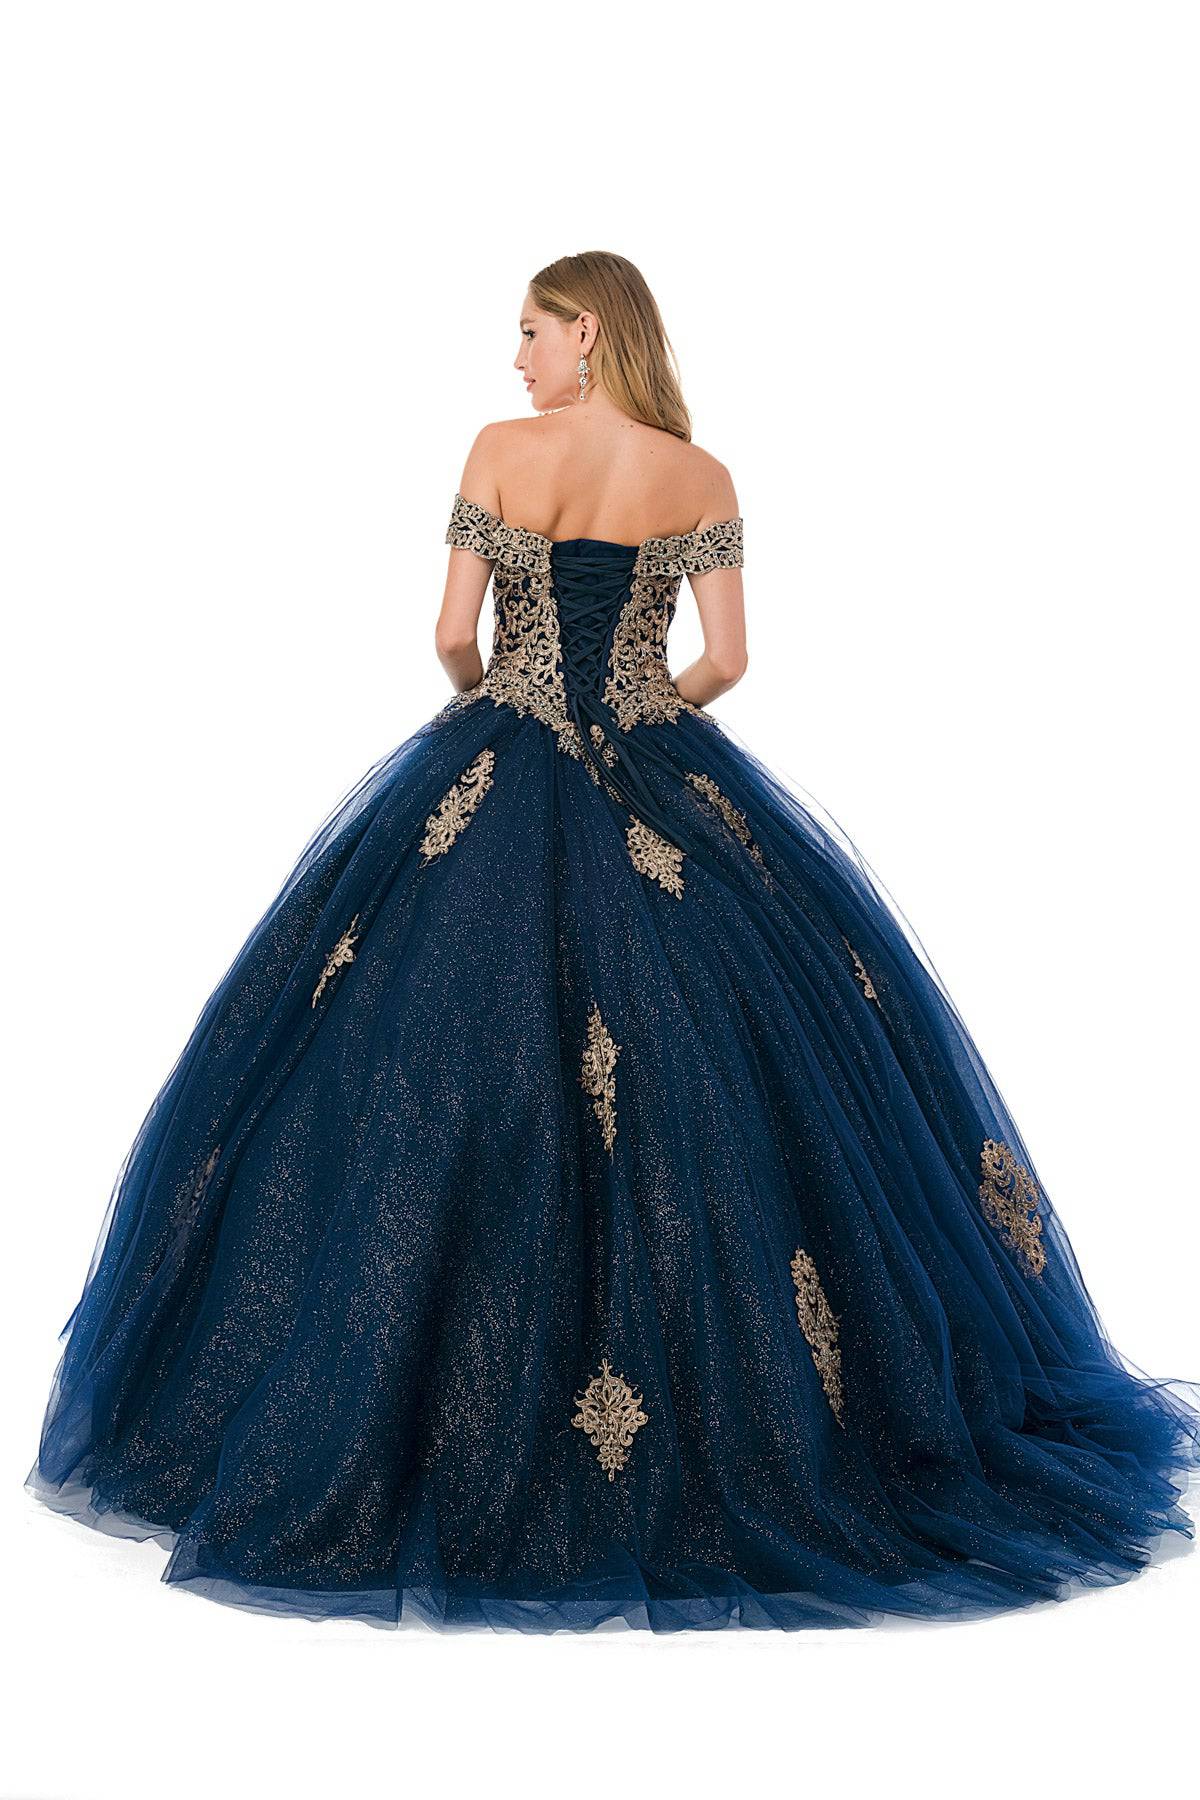 Aspeed L2779 Stunning Off Shoulder Shimmering Navy Ball Gown - NORMA REED